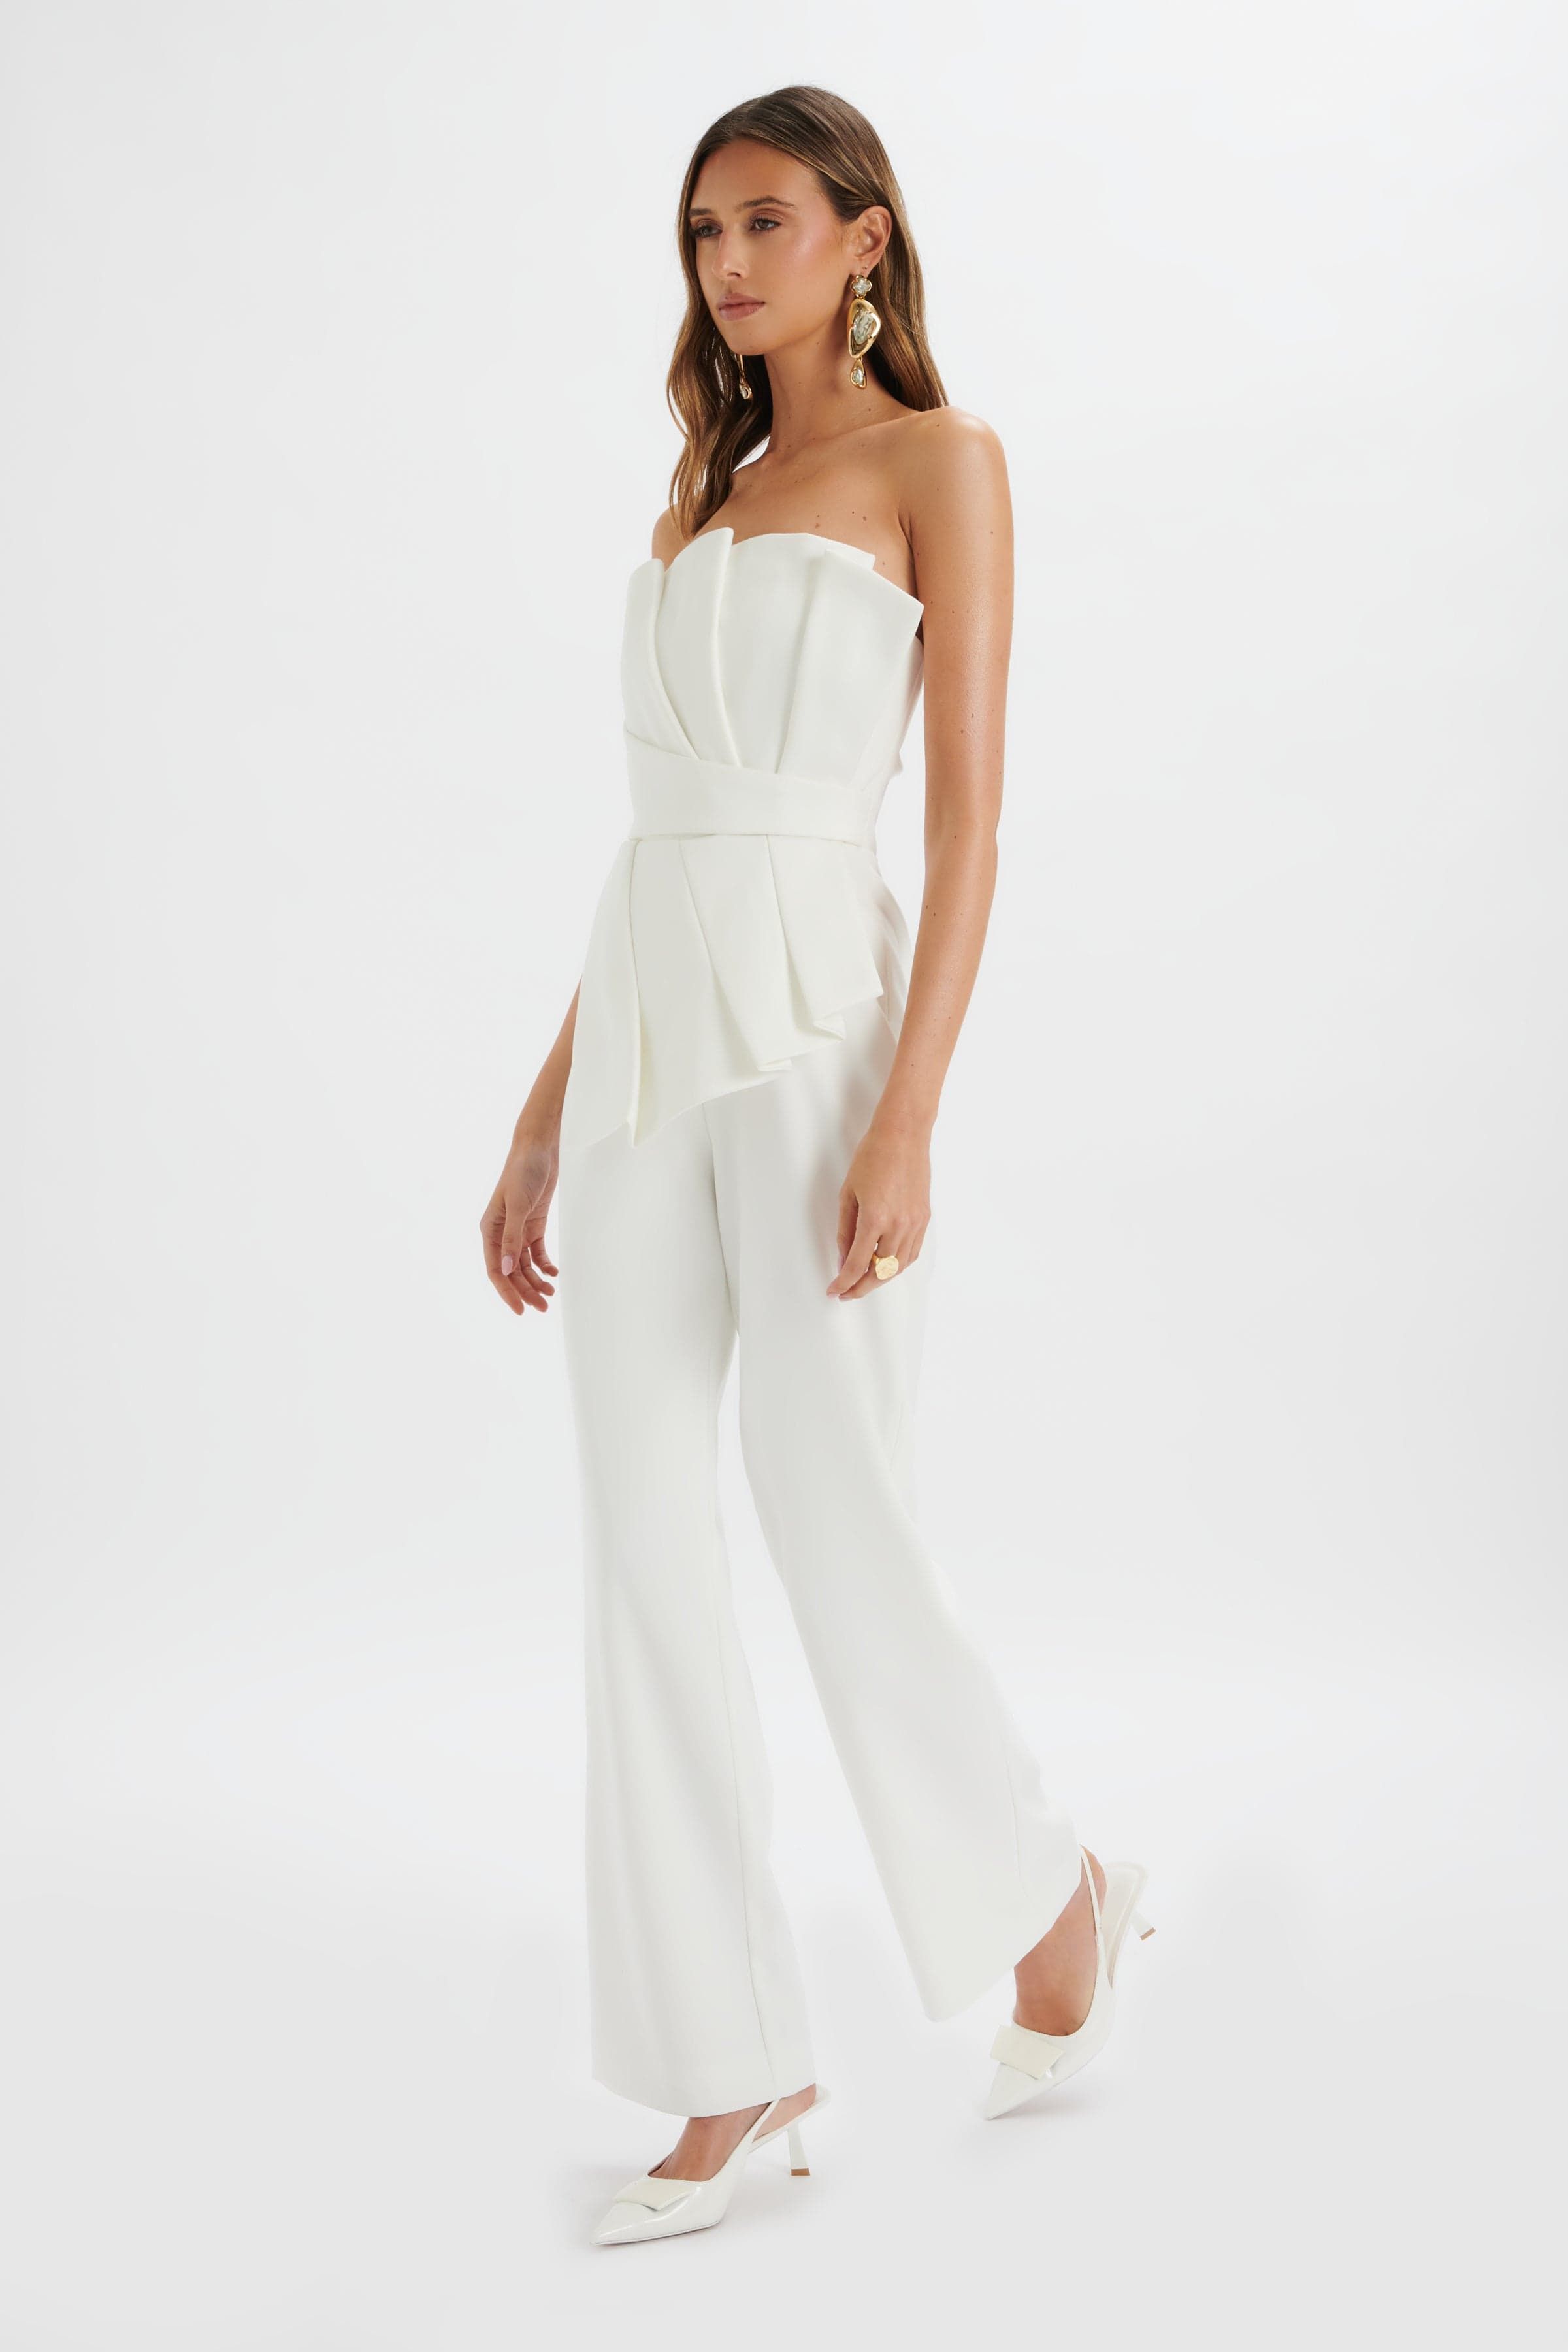 <p><strong>$128.00</strong></p><p><a href="https://lavishalice.com/products/asymmetric-pleated-frill-straight-leg-jumpsuit-in-white">Shop Now</a></p><p>We're obsessed with this white jumpsuit from Lavish Alice. Perfect for a city wedding, the strapless bandeau style features silky draped fabric, pleated detailing and frills. Add oversized earrings and you've got yourself a chic, contemporary bridal look.</p>